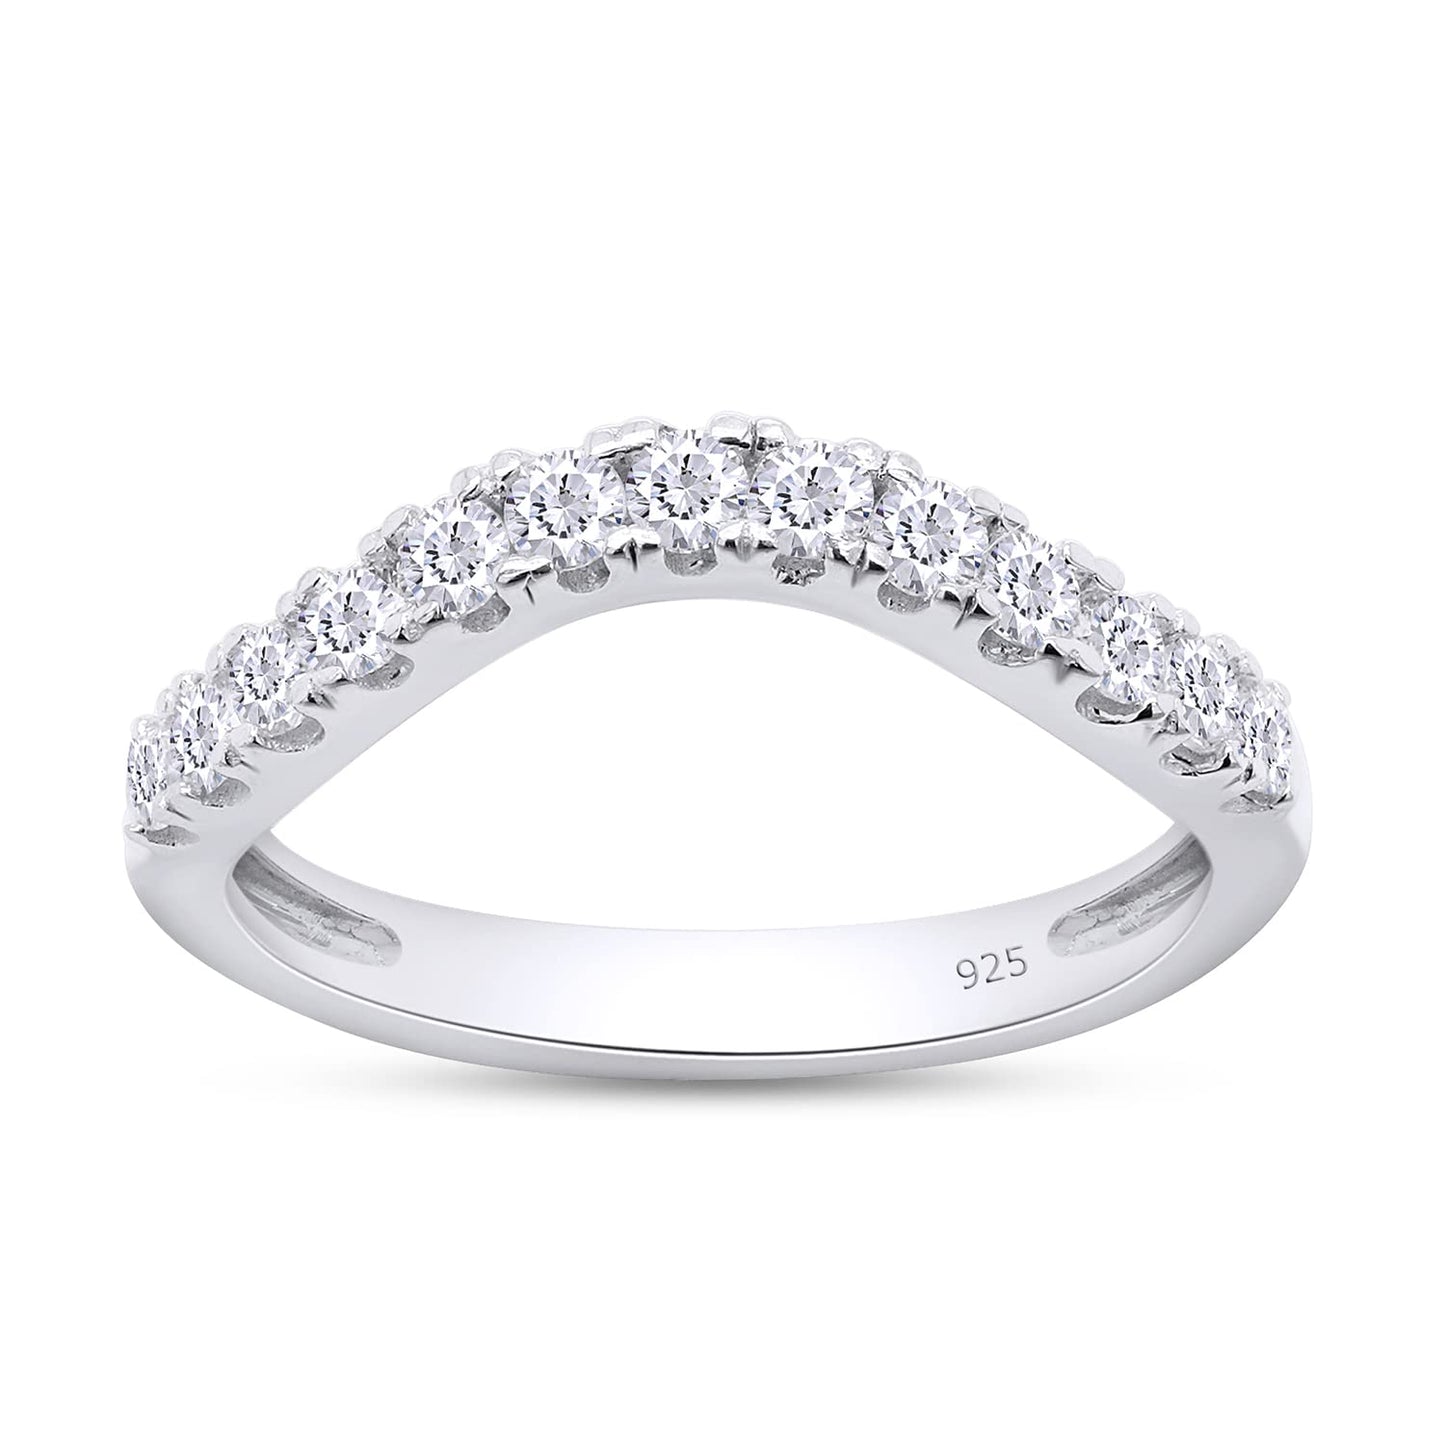 0.33 Carat Lab Created Moissanite Diamond Half Eternity Curved Wedding Band Ring In 925 Sterling Silver Jewelry